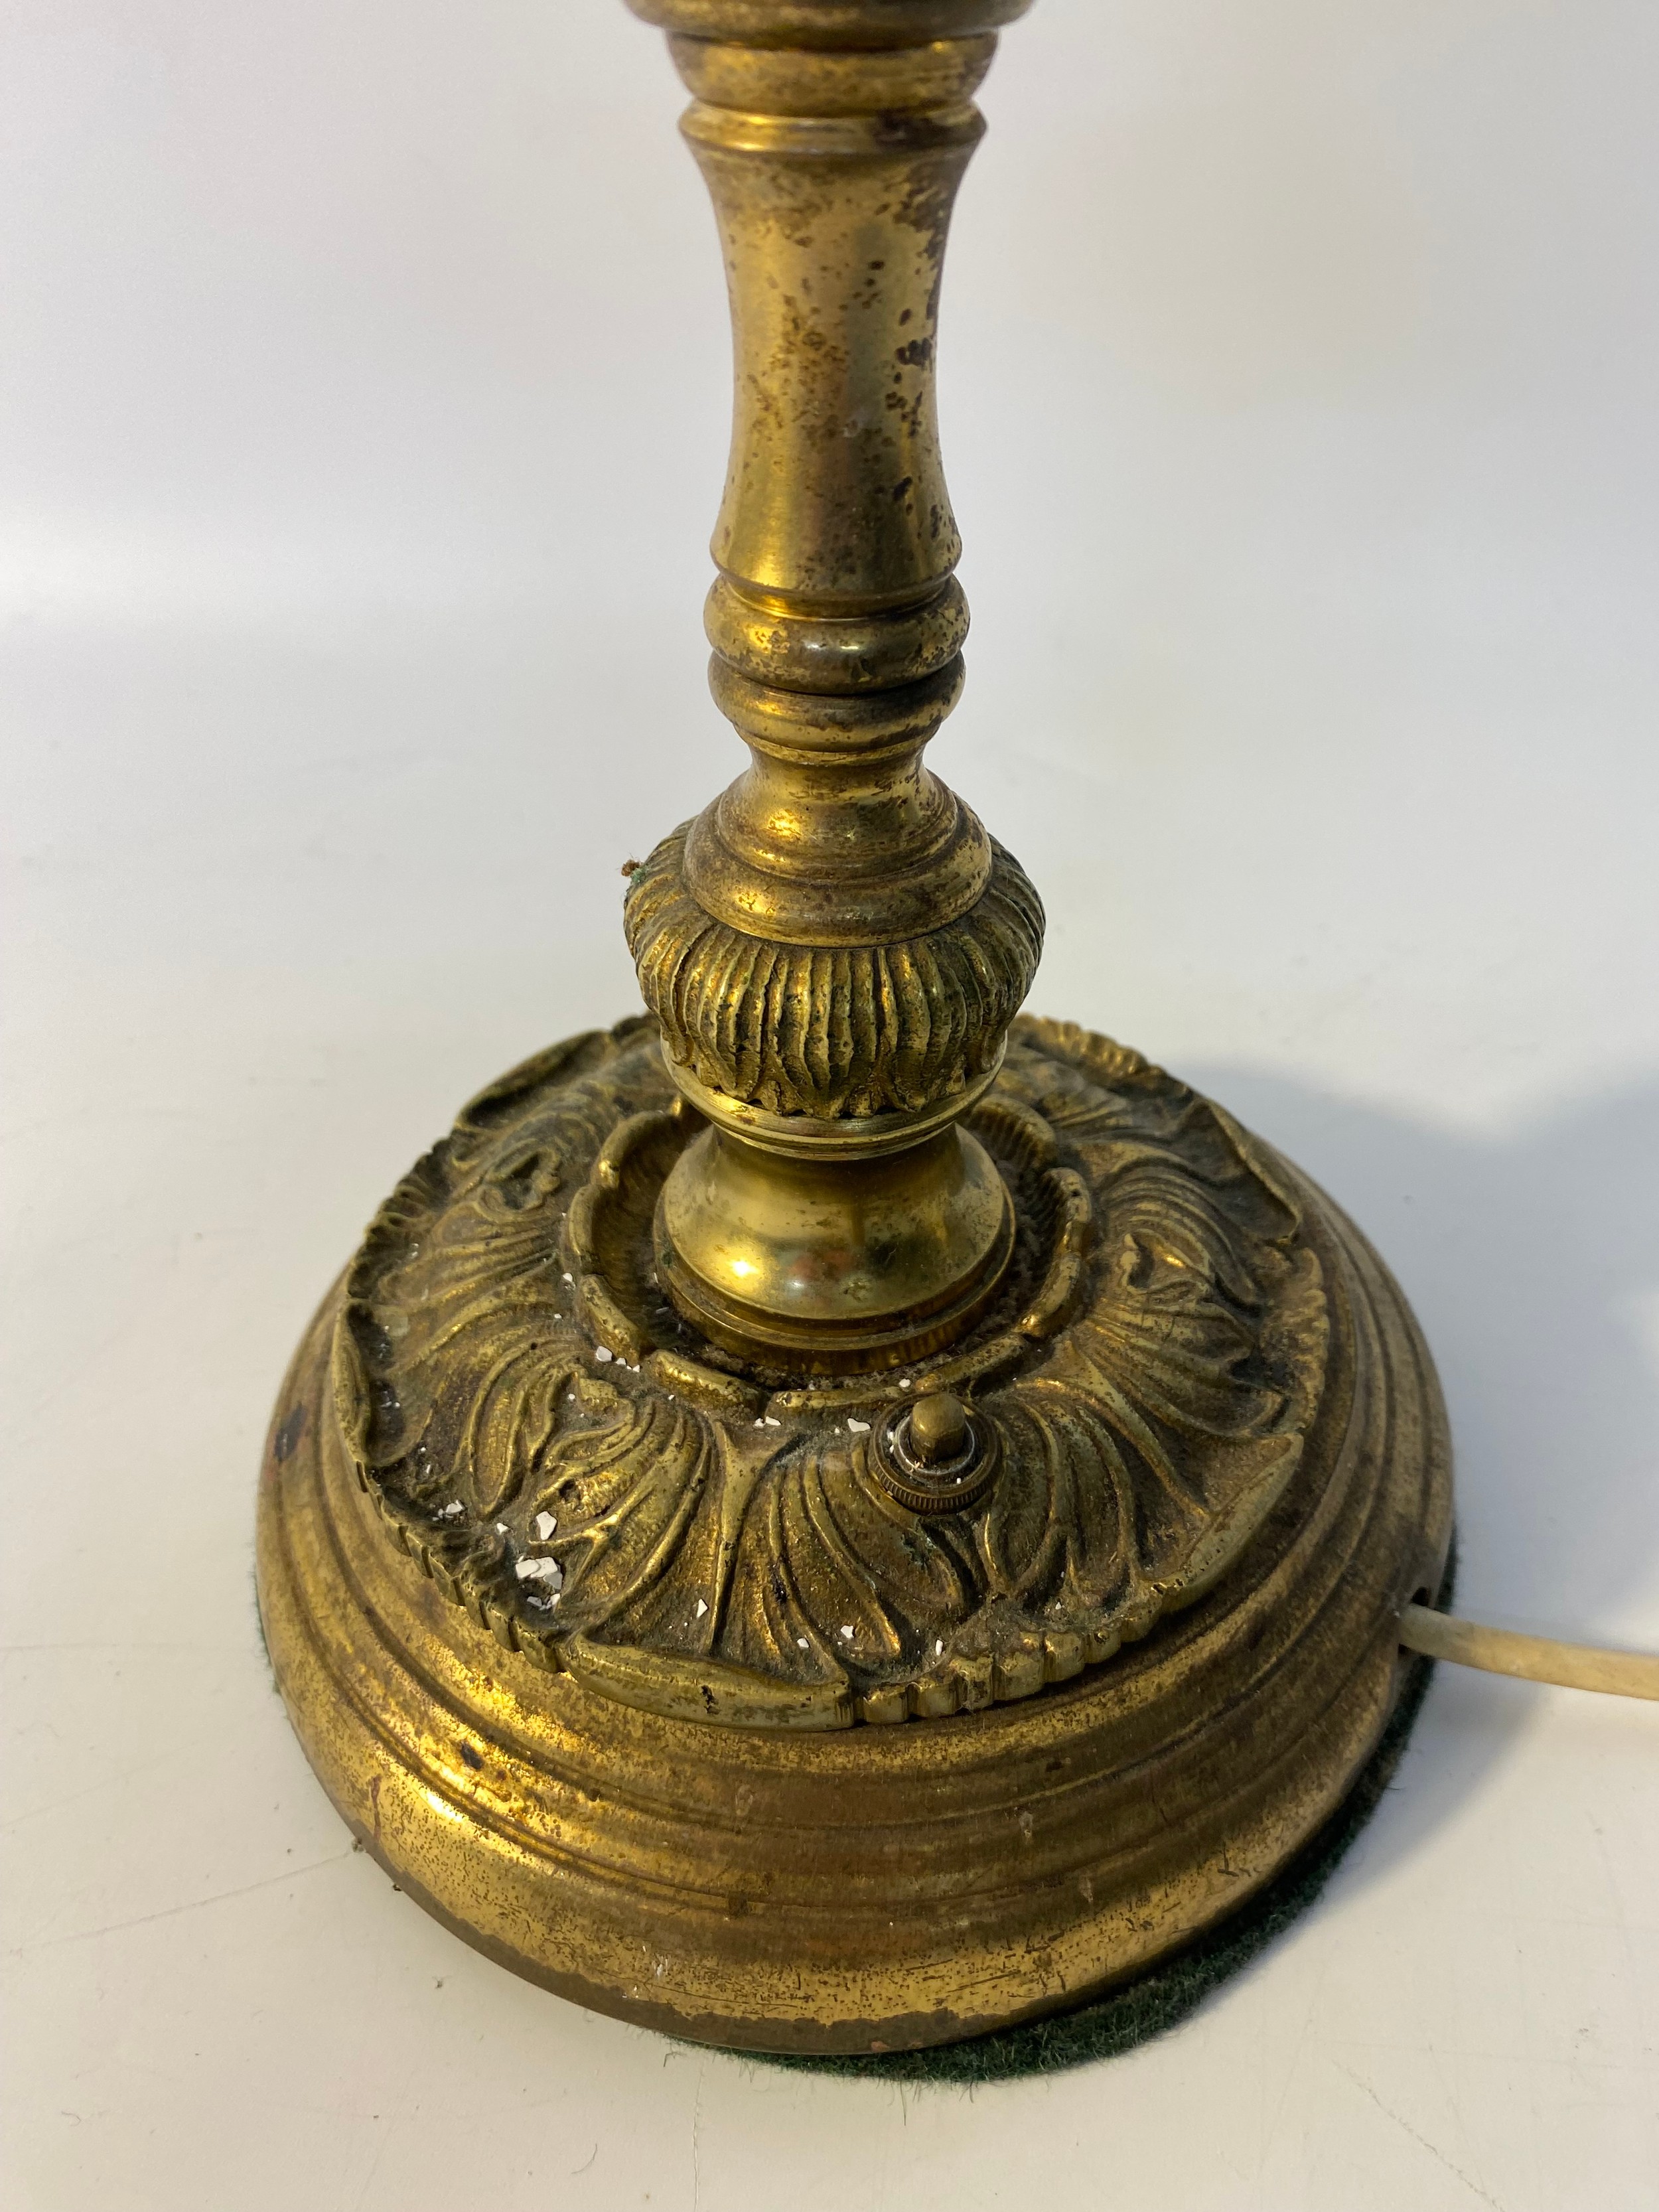 20th century brass desk table lamp with enamel shade [66cm] - Image 3 of 4